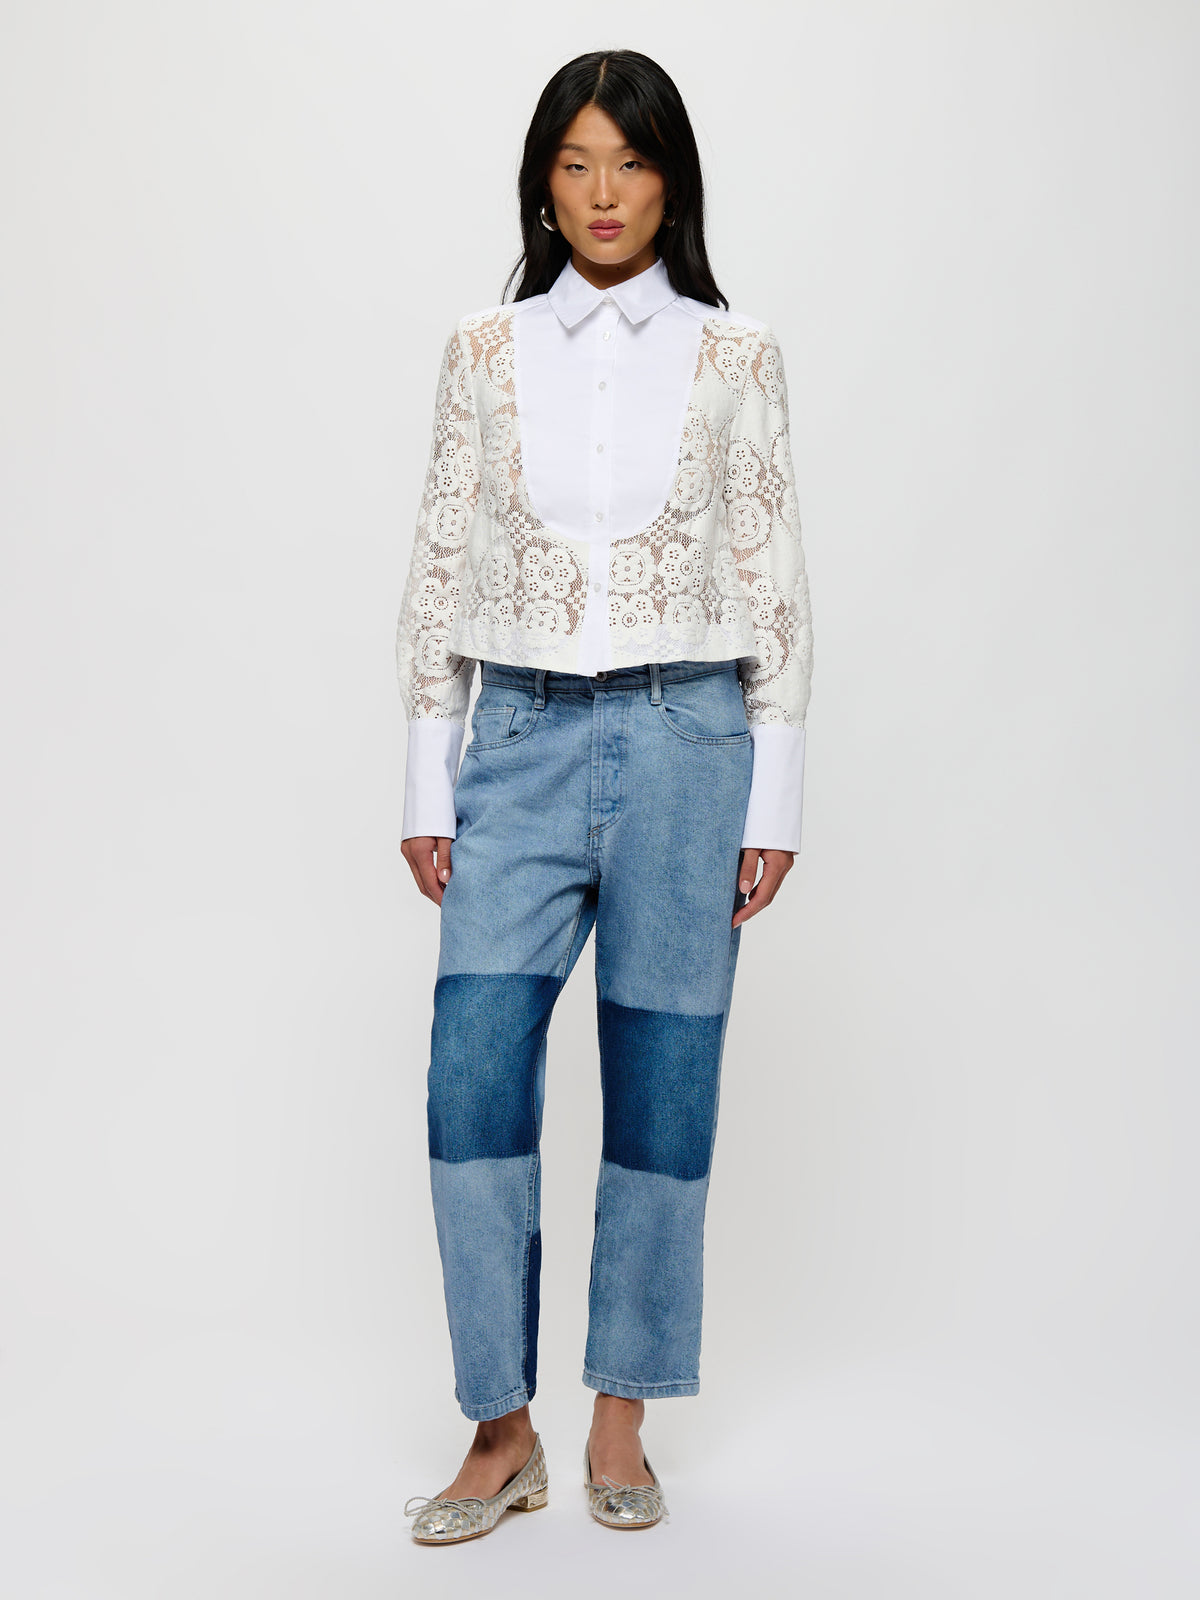 Collared Lace Blouse